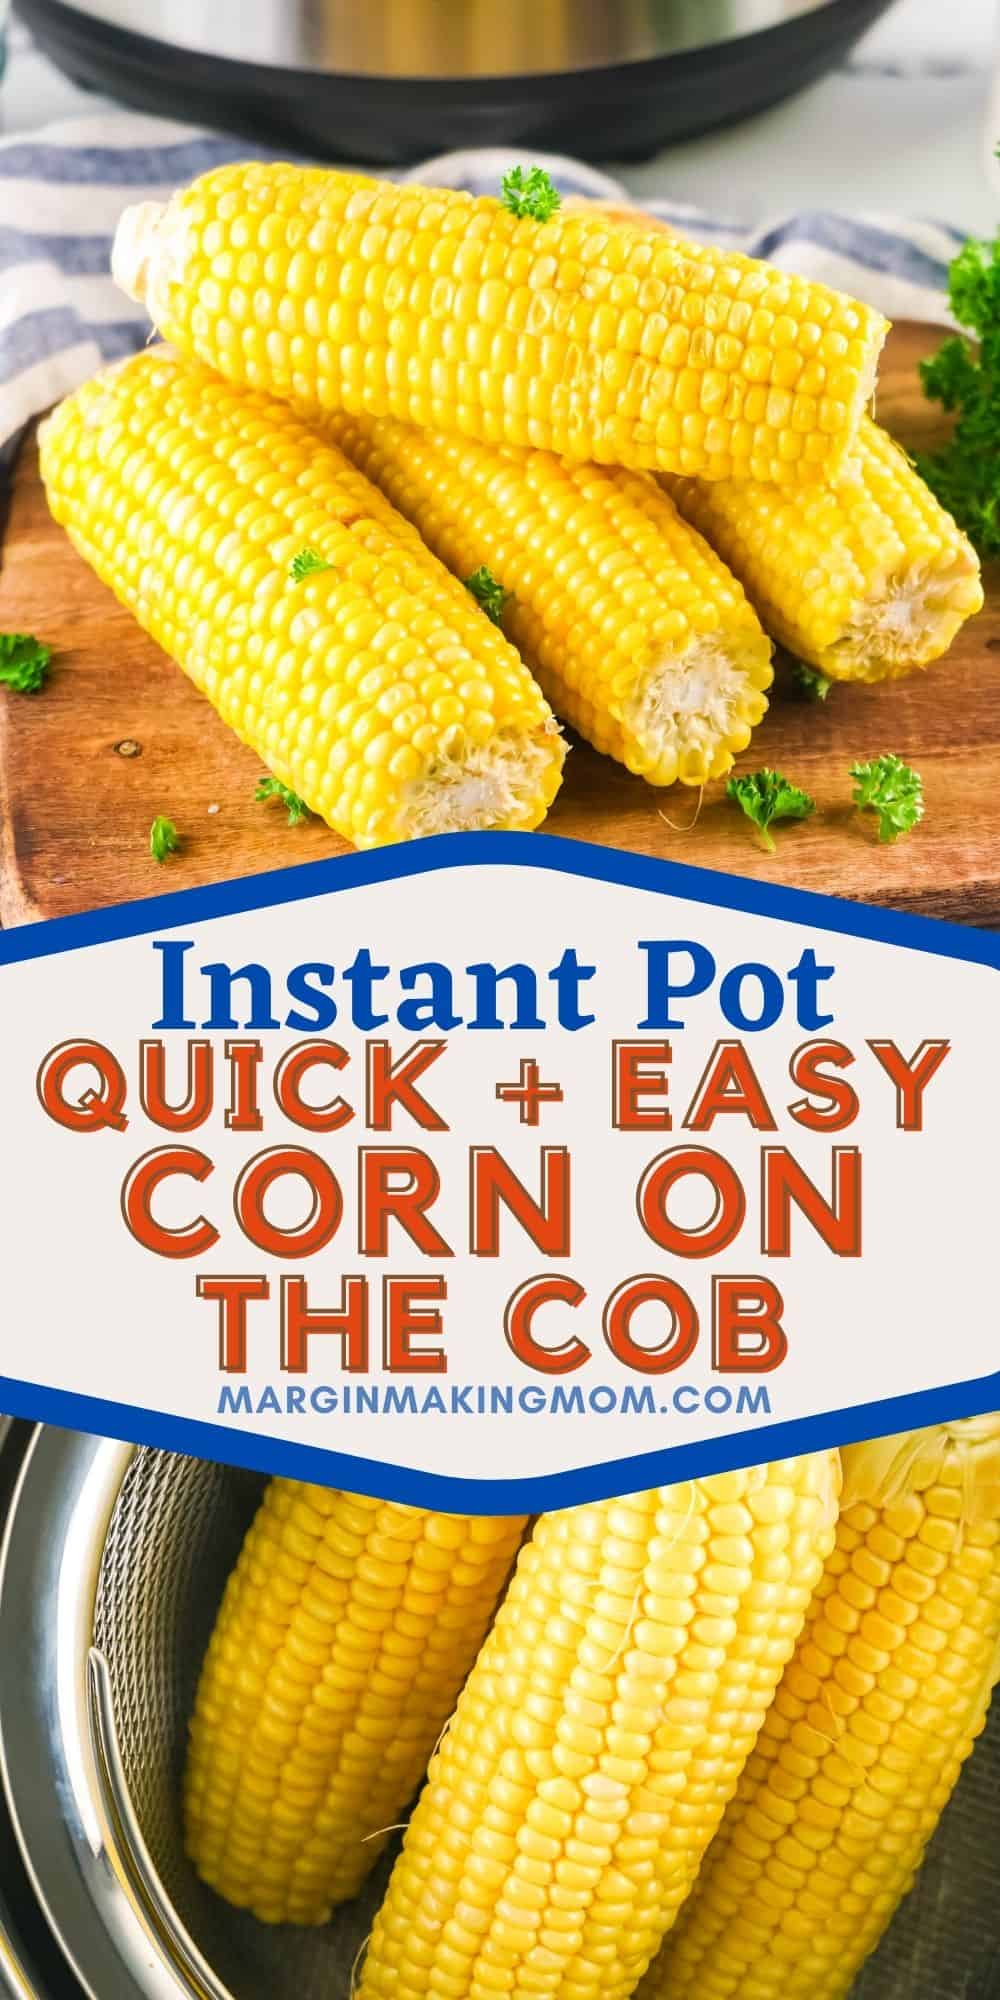 collage image showing corn on the cob in a steamer basket in the Instant Pot, then cooked and served on a cutting board in front of the Instant Pot pressure cooker